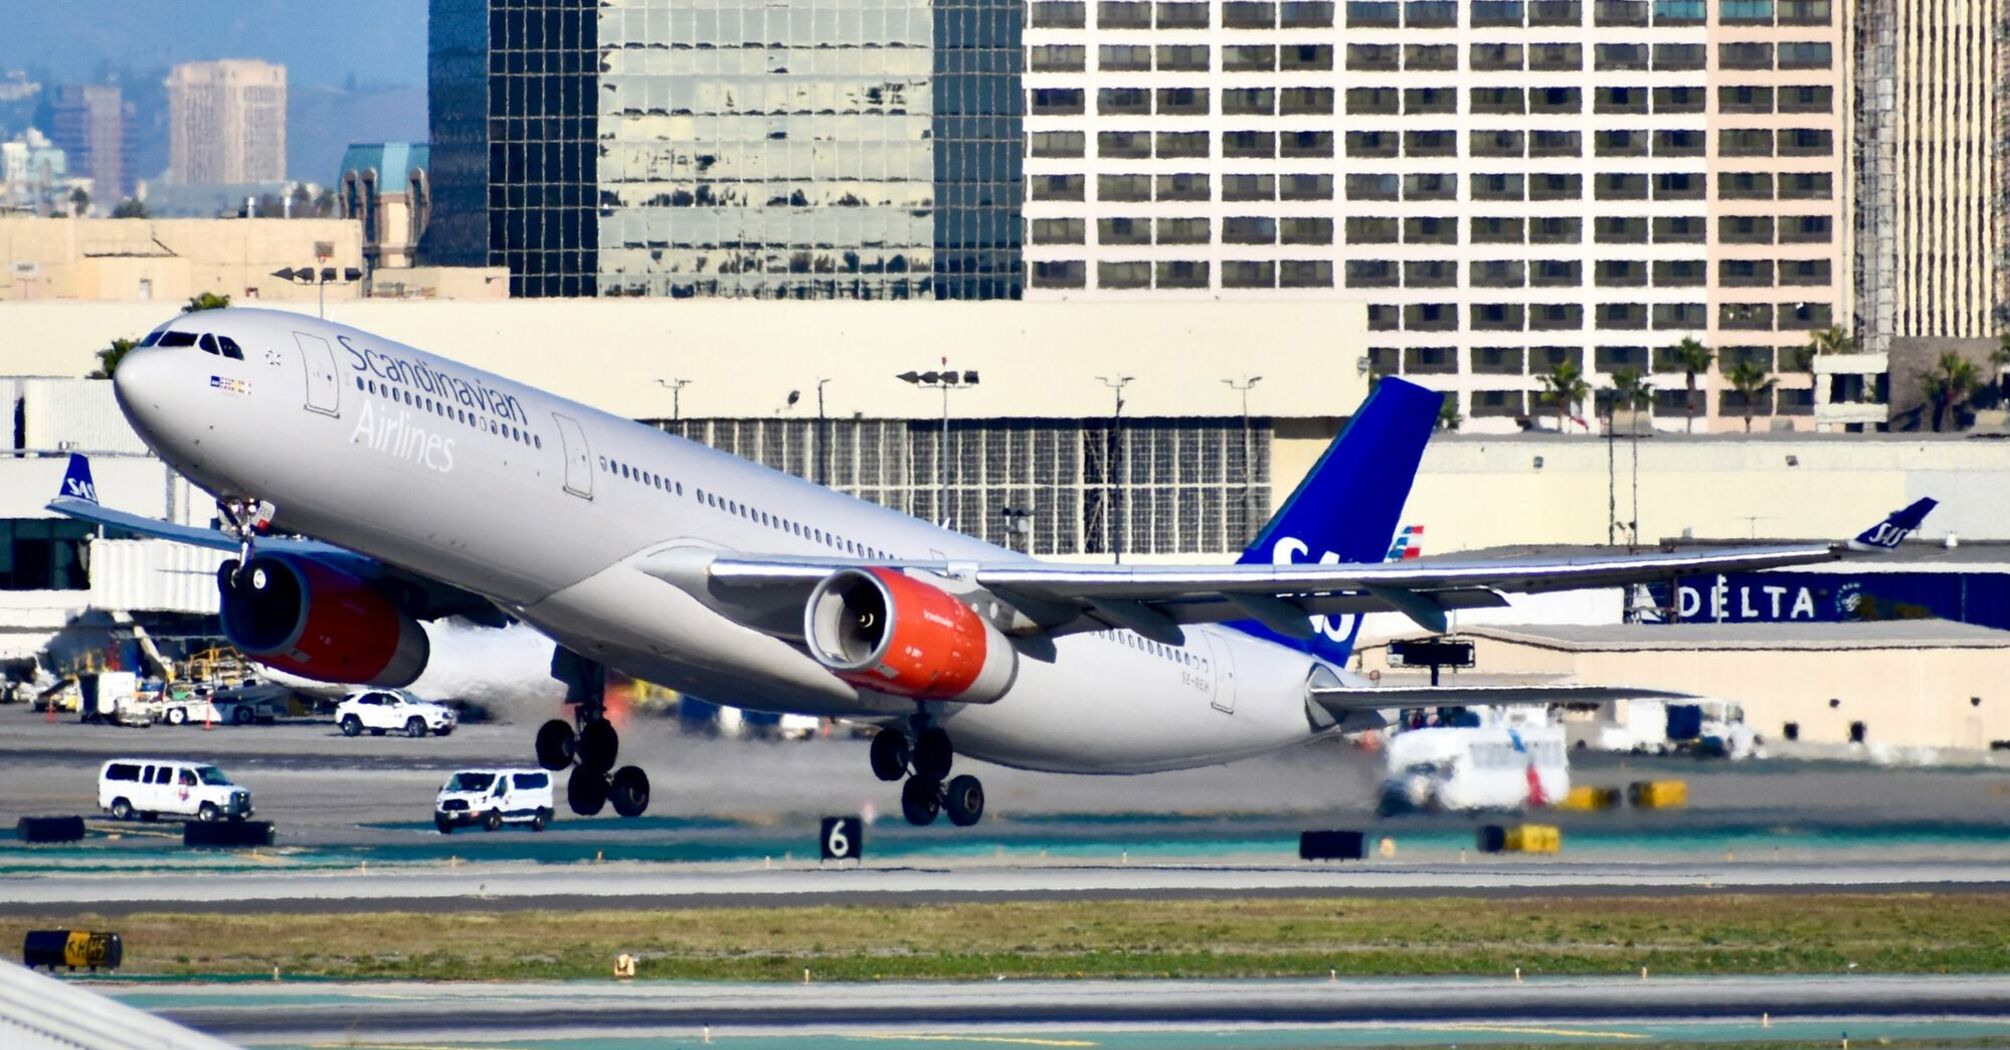 SAS airplane taking off from an airport